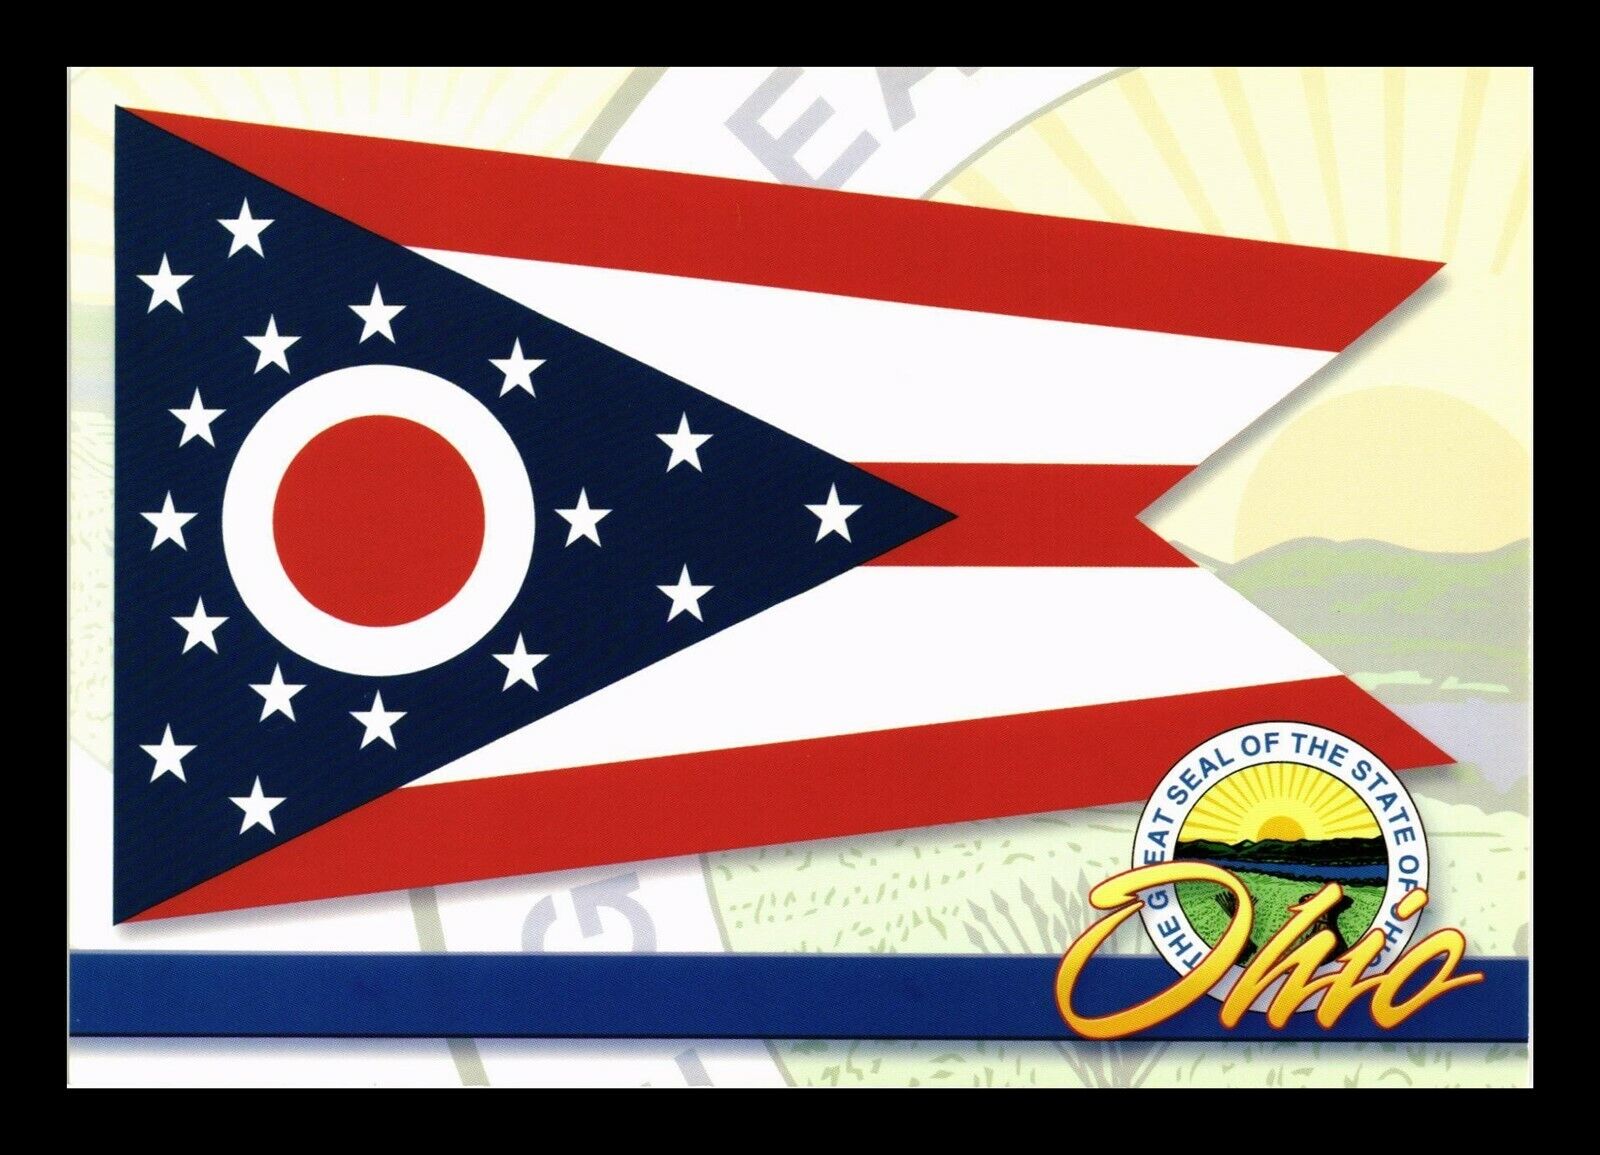 DR JIM STAMPS US OHIO STATEHOOD CARD 正規取扱店 MAXI FDC BICENTENNIAL CONTINENTAL 期間限定お試し価格 SIZE